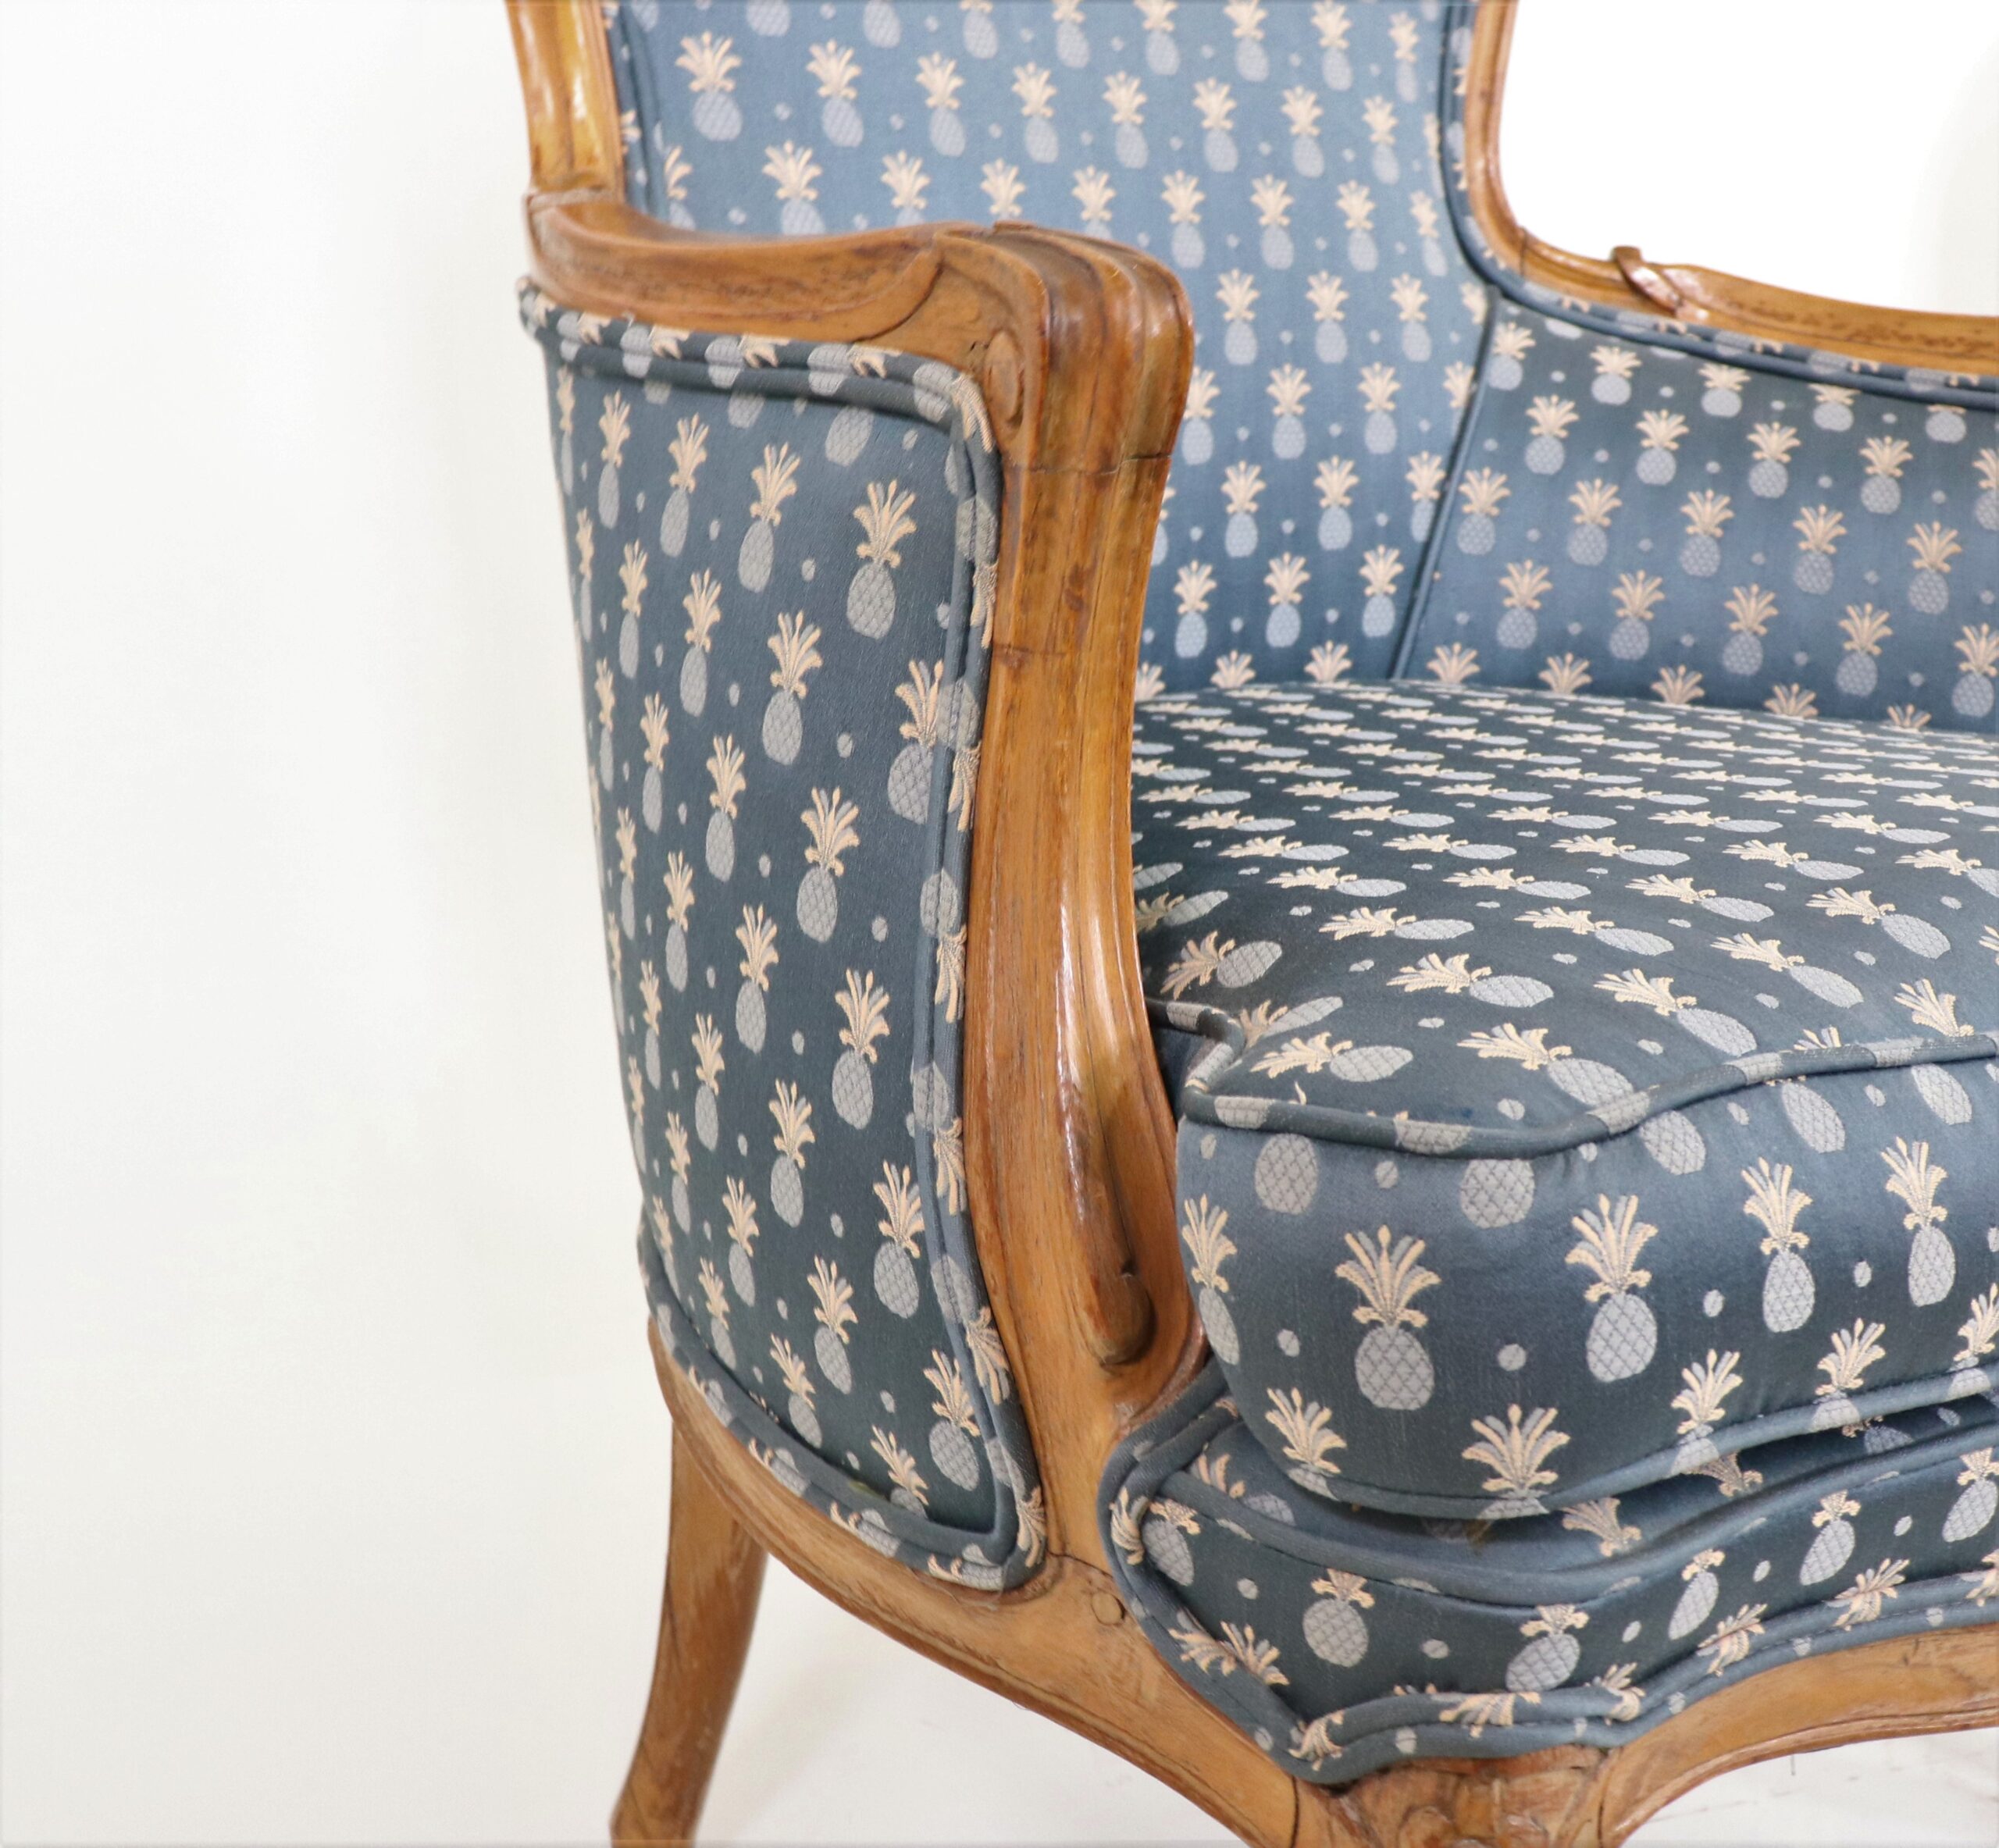 French Louis XV Bergere Chair + Vintage Damask Upholstery. Original Price:  $2,500